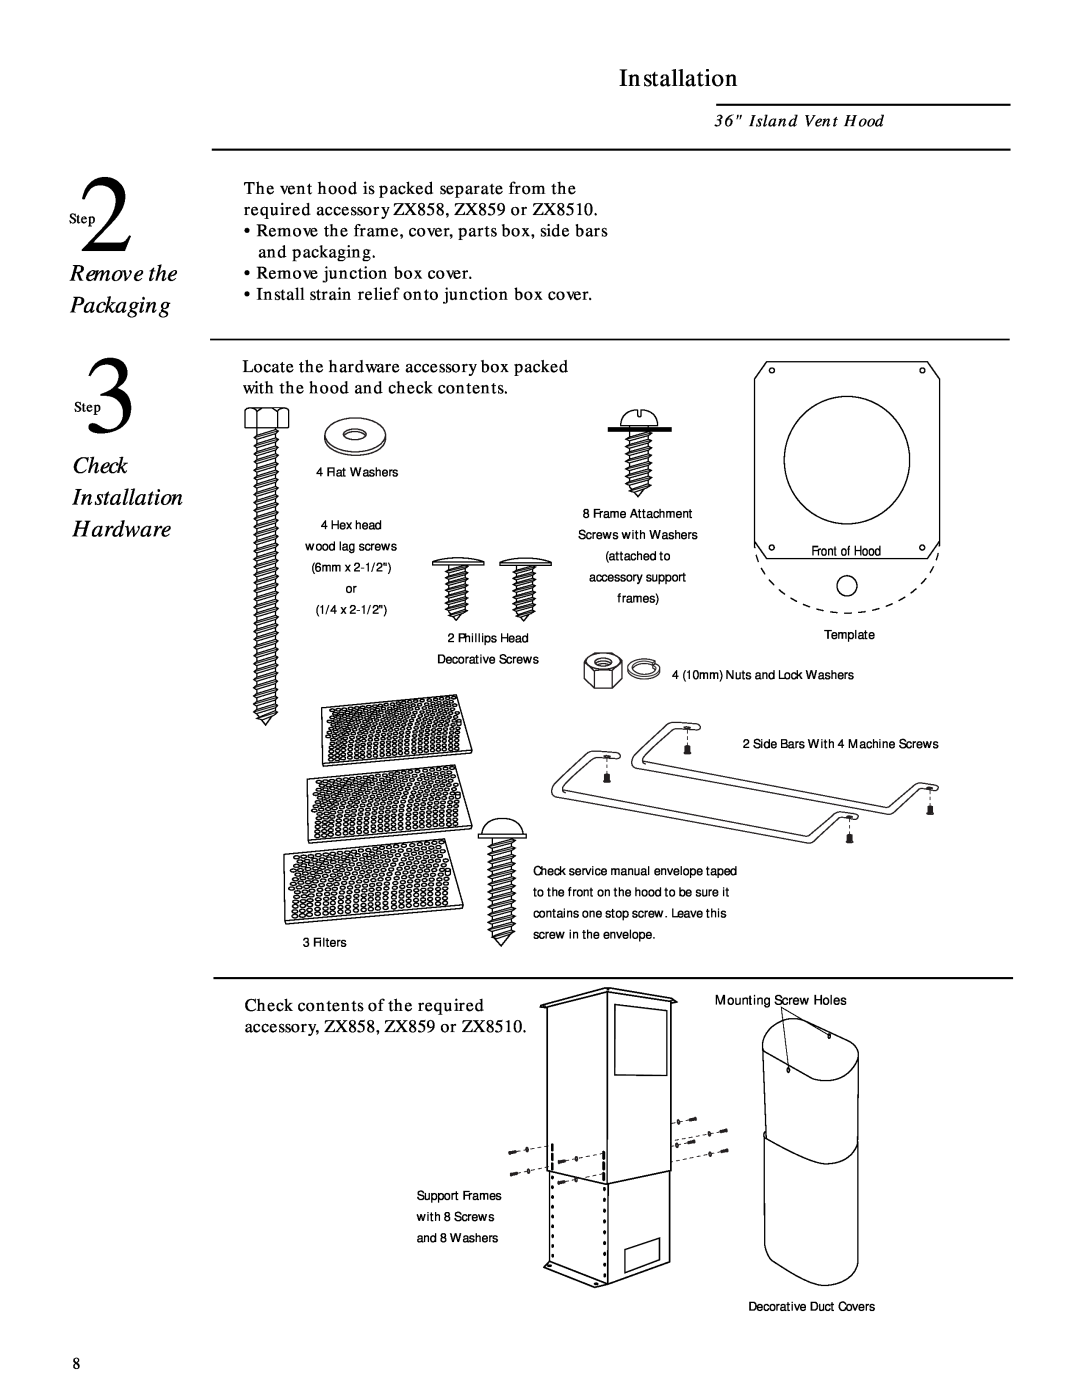 GE ZV850 installation instructions Check Installation Hardware, Remove the Packaging 